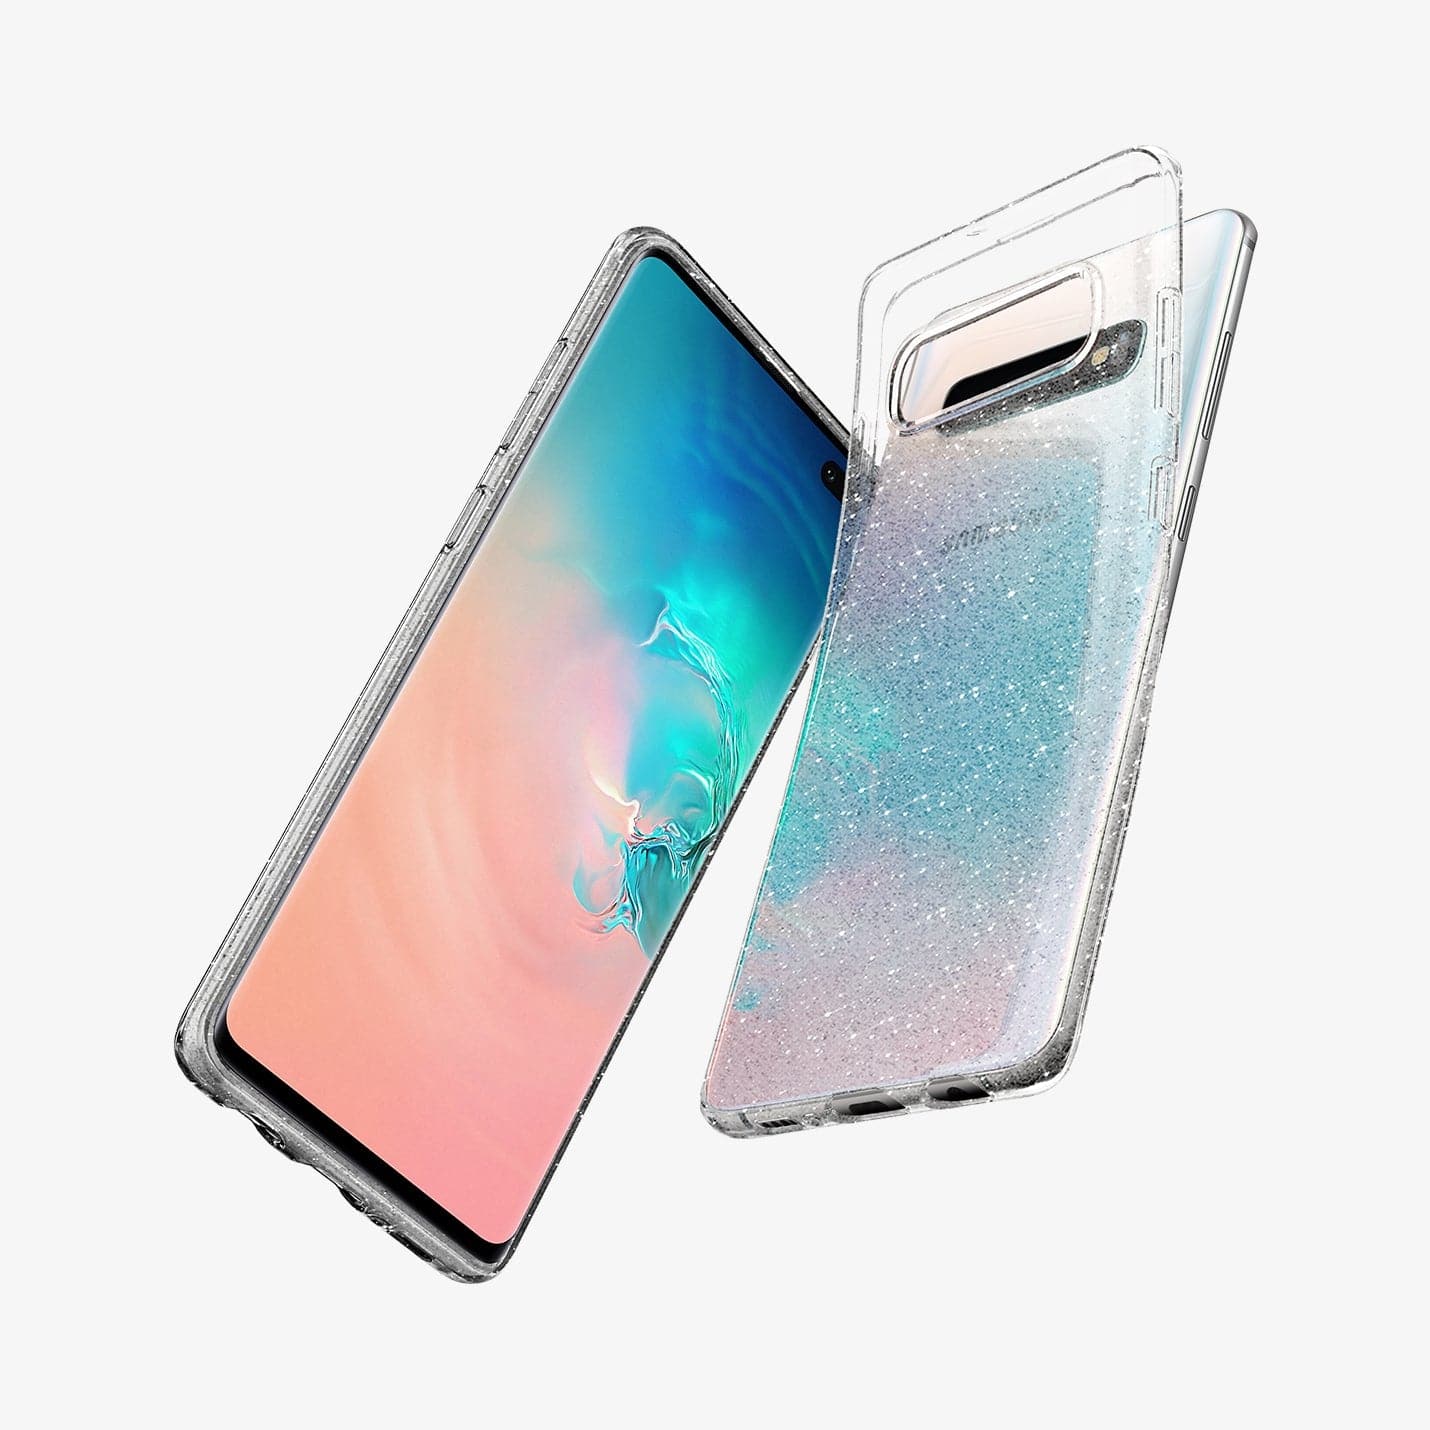 606CS25762 - Galaxy S10 Plus Liquid Crystal Glitter Case in crystal quartz showing the back, front and sides